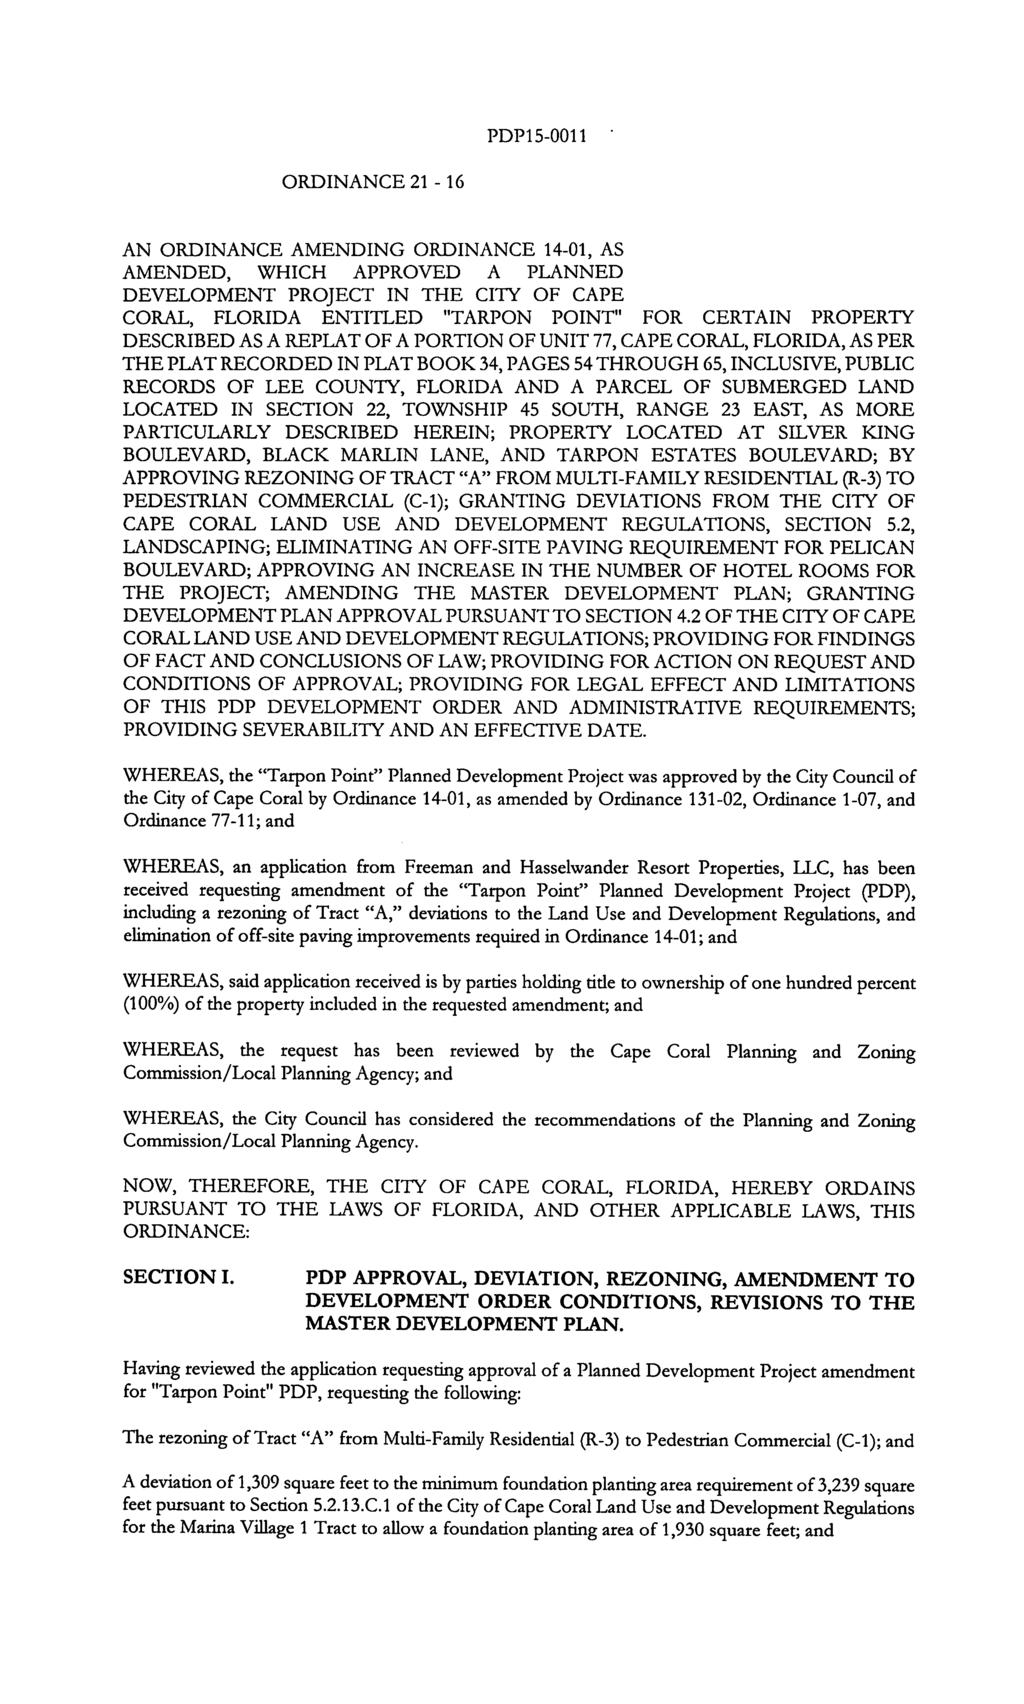 PDP15-0011 ORDINANCE 21-16 AN ORDINANCE AMENDING ORDINANCE 14-01, AS AMENDED, WHICH APPROVED A PLANNED DEVELOPMENT PROJECT IN THE CITY OF CAPE CORAL, FLORIDA ENTITLED "TARPON POINT" FOR CERTAIN